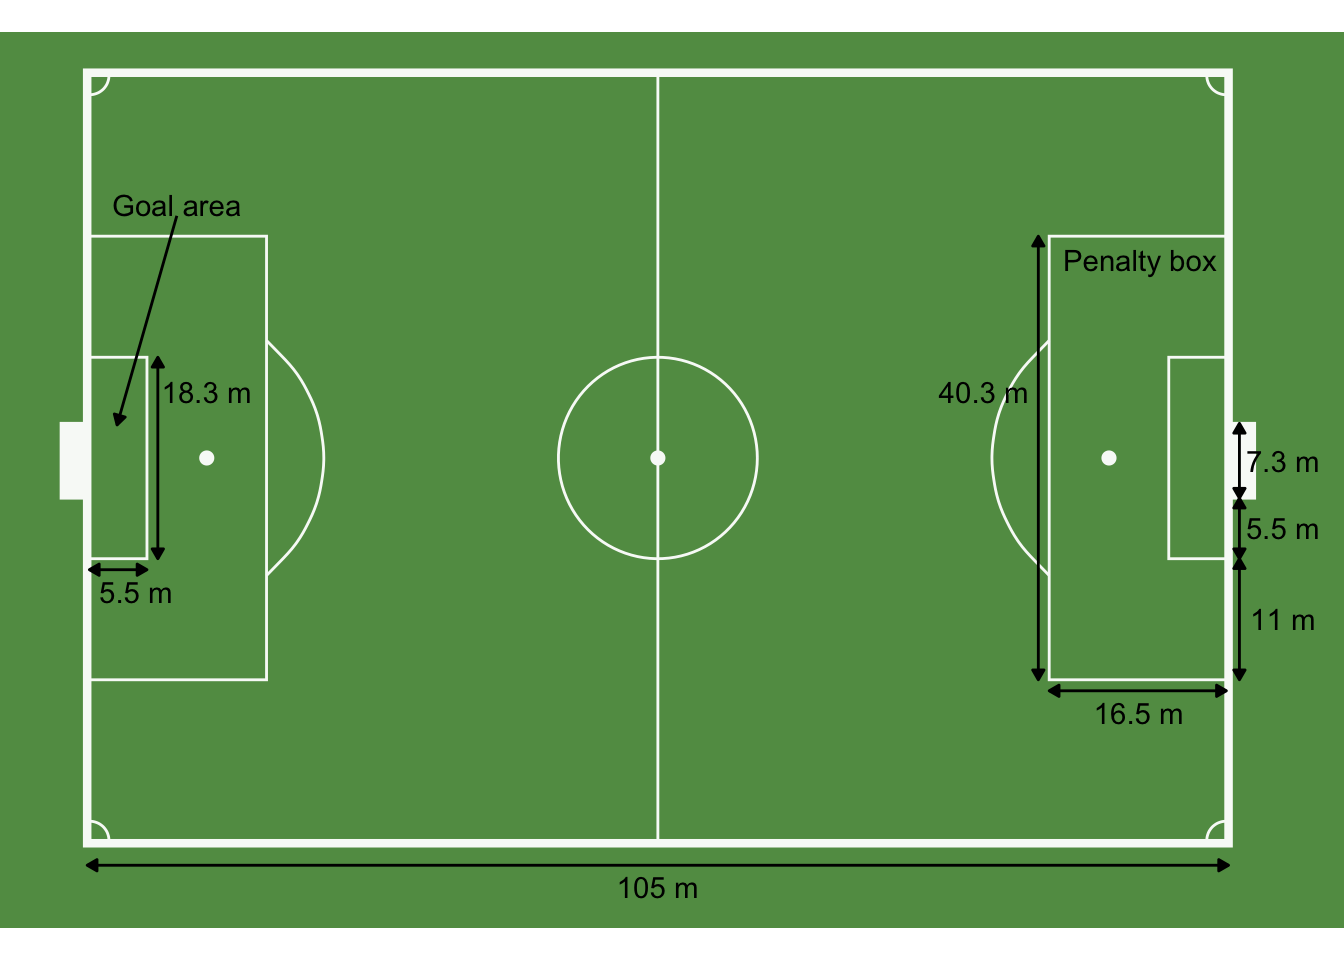 Standard pitch measurements. All units are in meters.